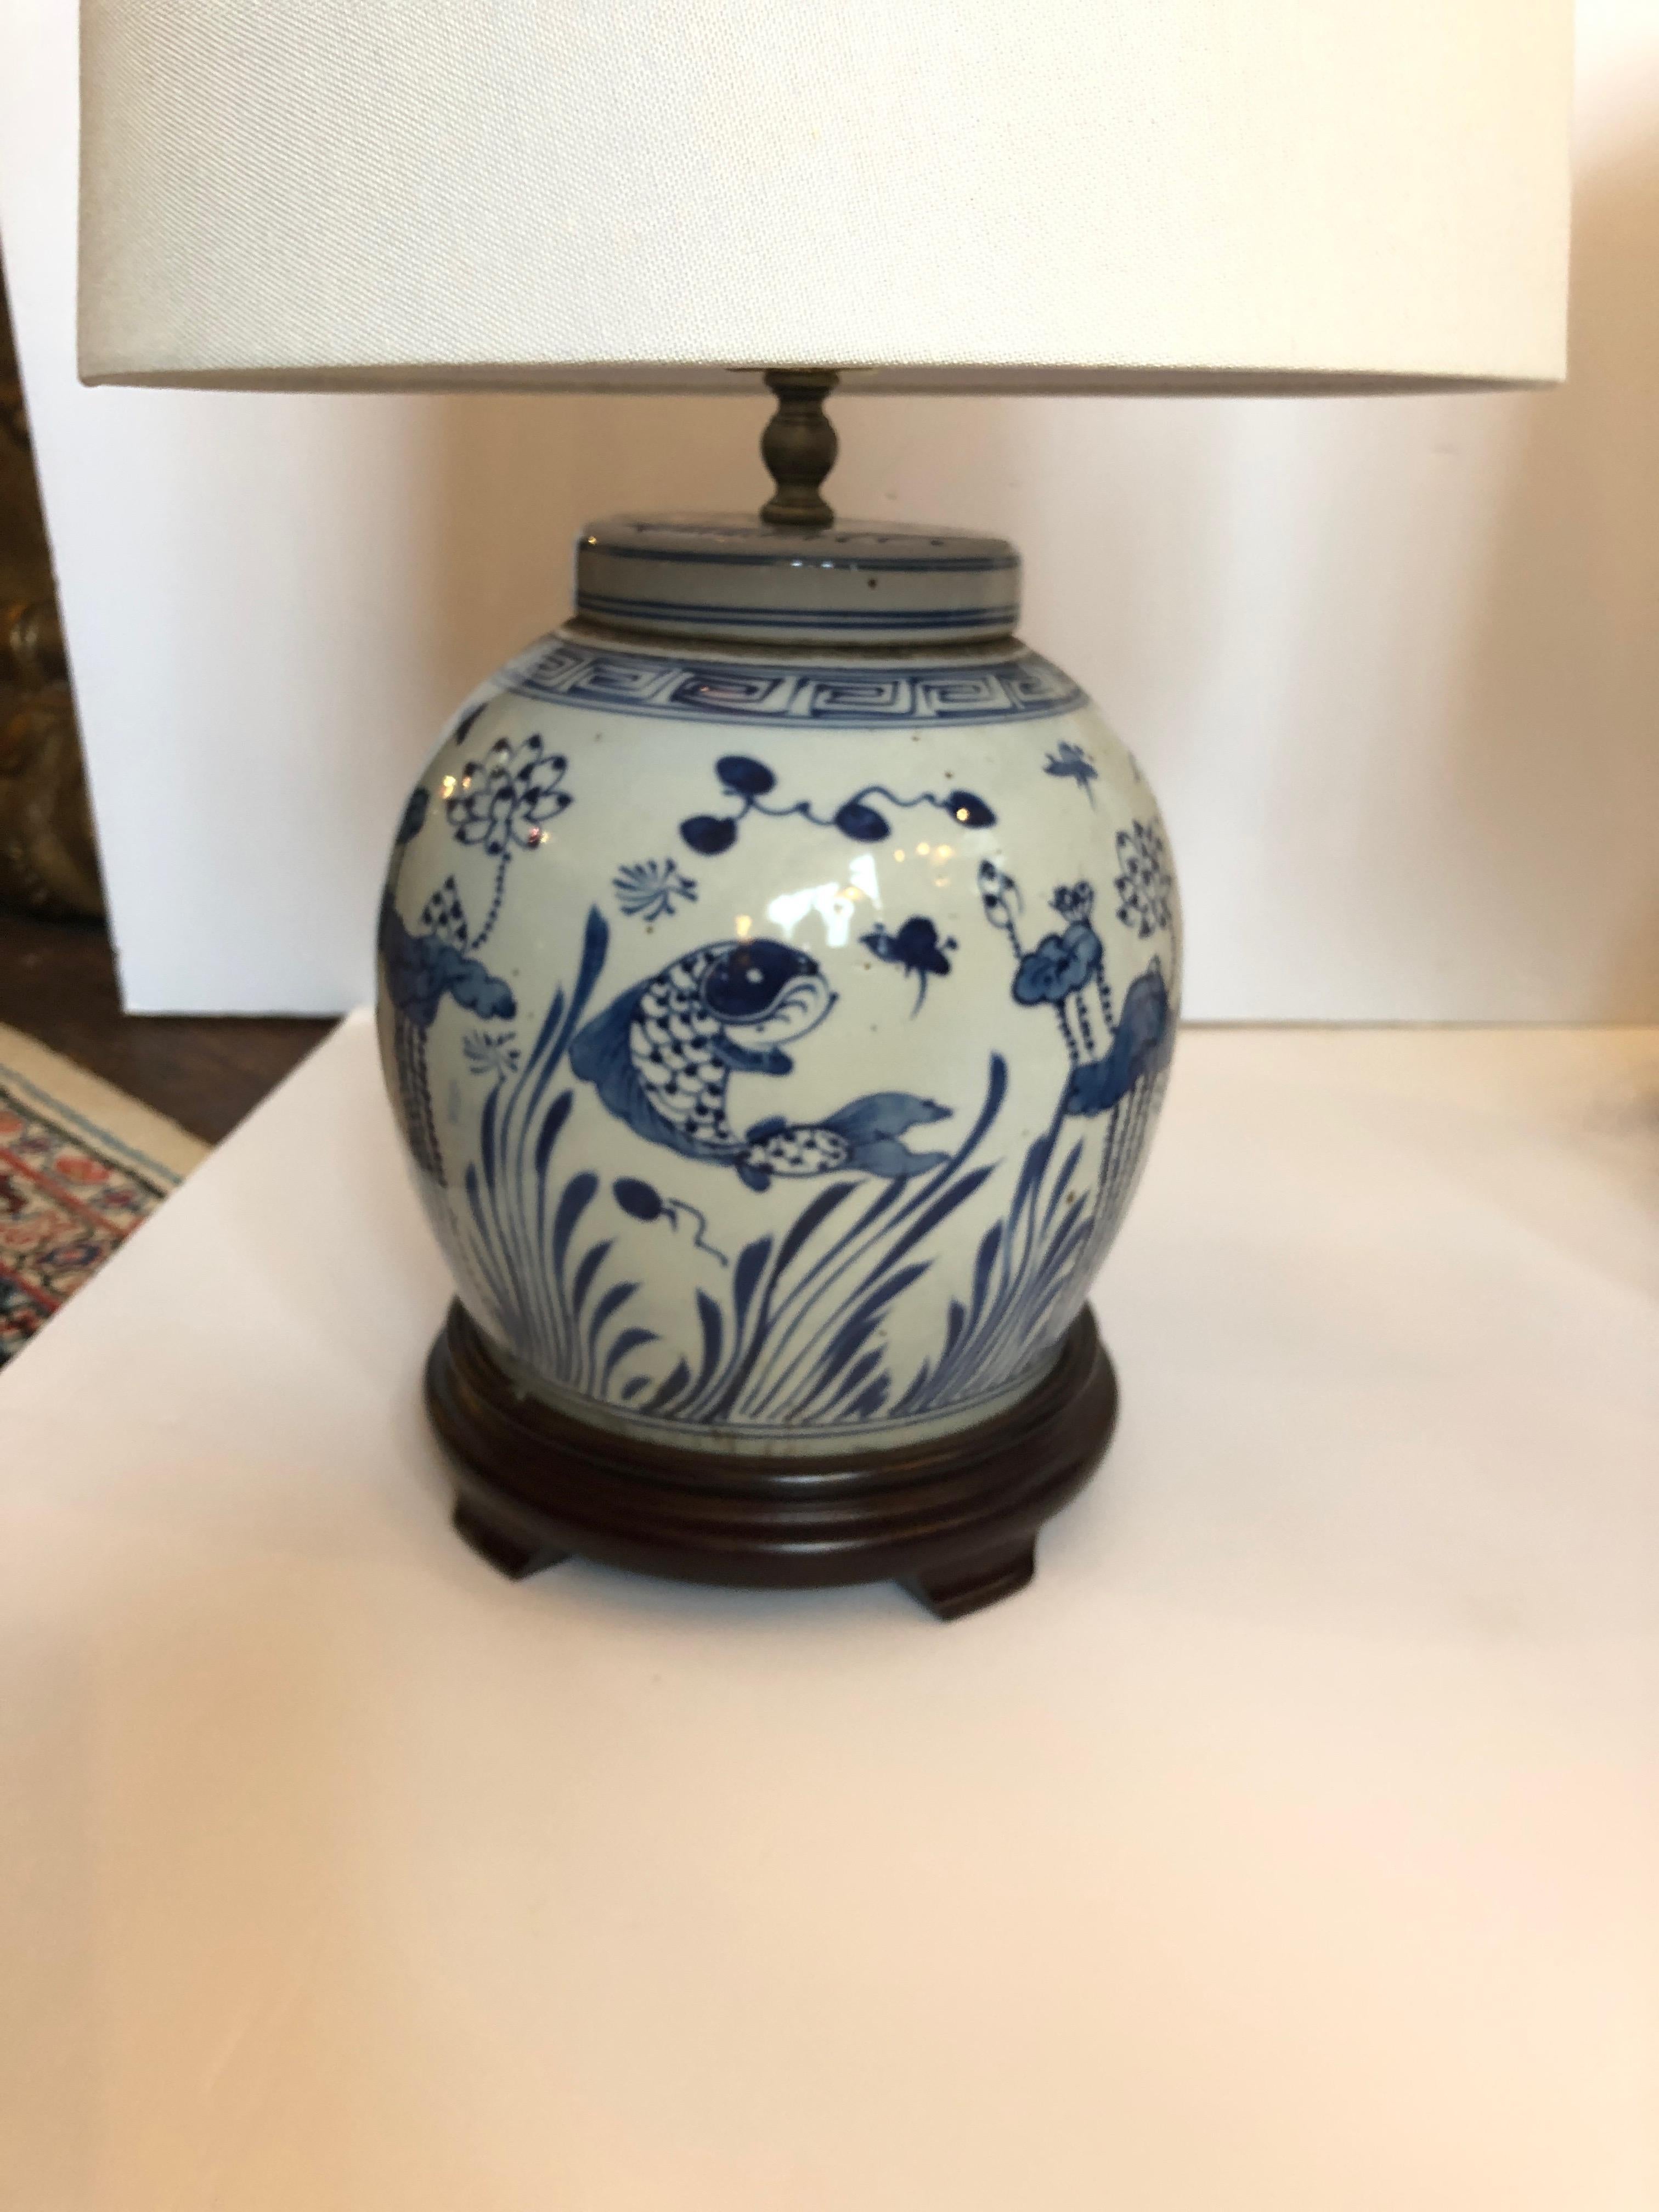 Elegant pair of blue and white canton style ginger jars mounted as lamps on dark wood stands and decorated beautifully with foliage and carp fish. Jars are 10 W bases are 8.5.